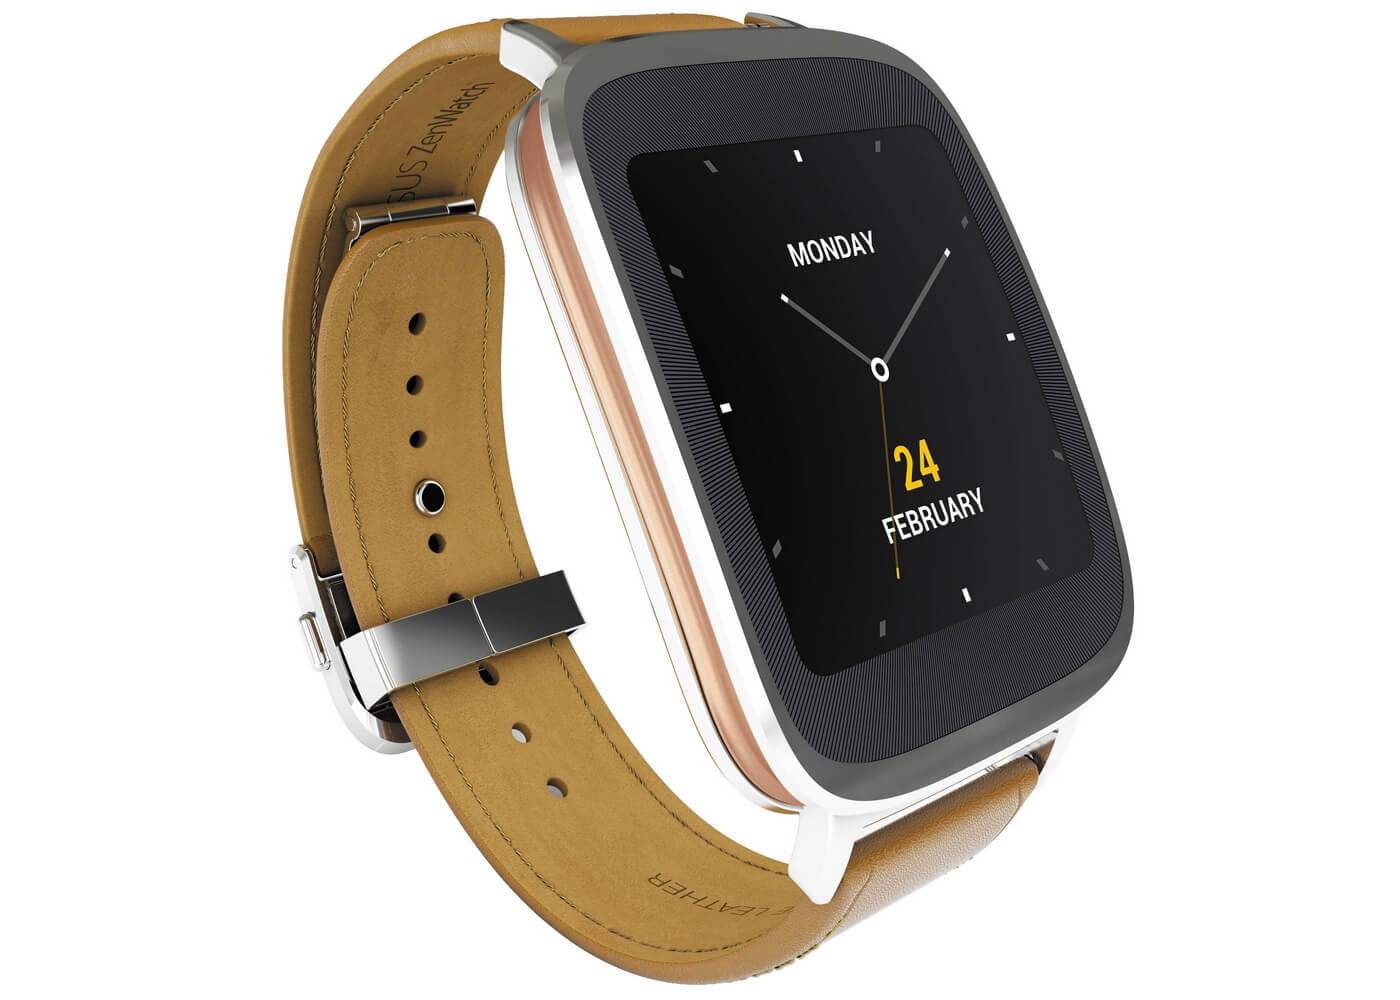 ASUS ZenWatch 2 работают на базе Android Wear